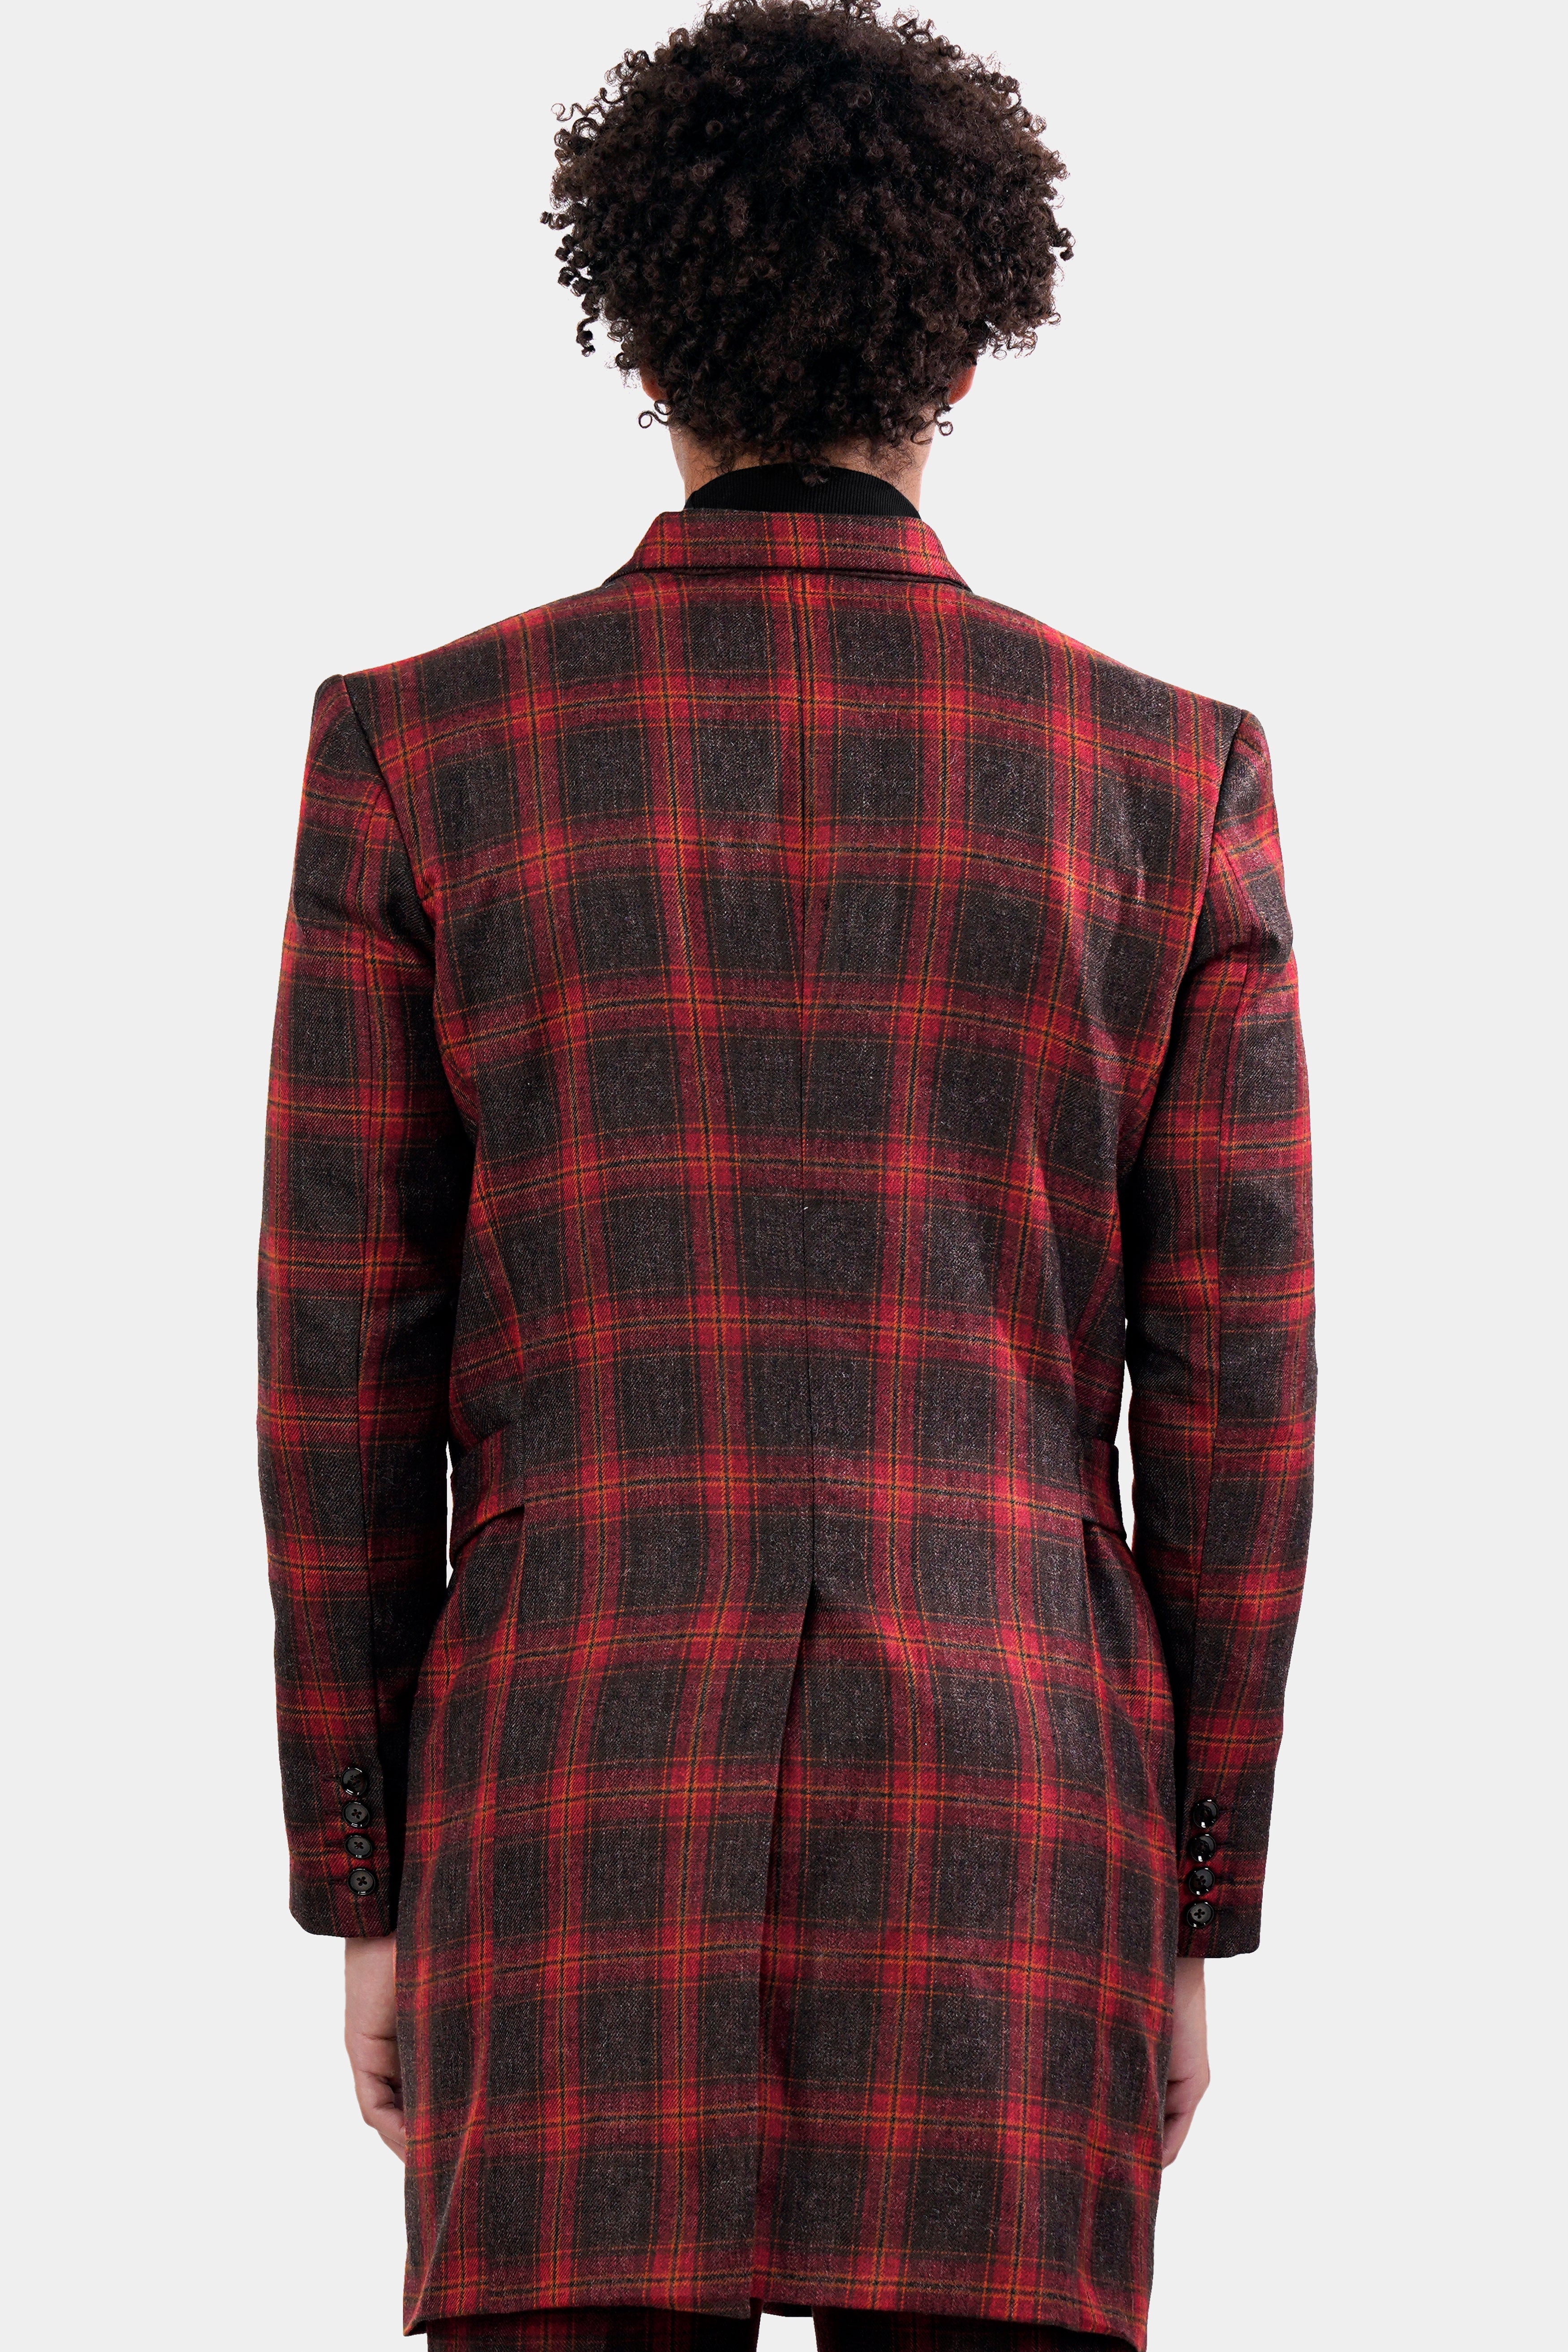 Claret Red and Walnut Brown Tweed Plaid Double Breasted Designer Trench Coat TCB2918-DB-D1-36, TCB2918-DB-D1-38, TCB2918-DB-D1-40, TCB2918-DB-D1-42, TCB2918-DB-D1-44, TCB2918-DB-D1-46, TCB2918-DB-D1-48, TCB2918-DB-D1-50, TCB2918-DB-D1-52, TCB2918-DB-D1-54, TCB2918-DB-D1-56, TCB2918-DB-D1-58, TCB2918-DB-D1-60